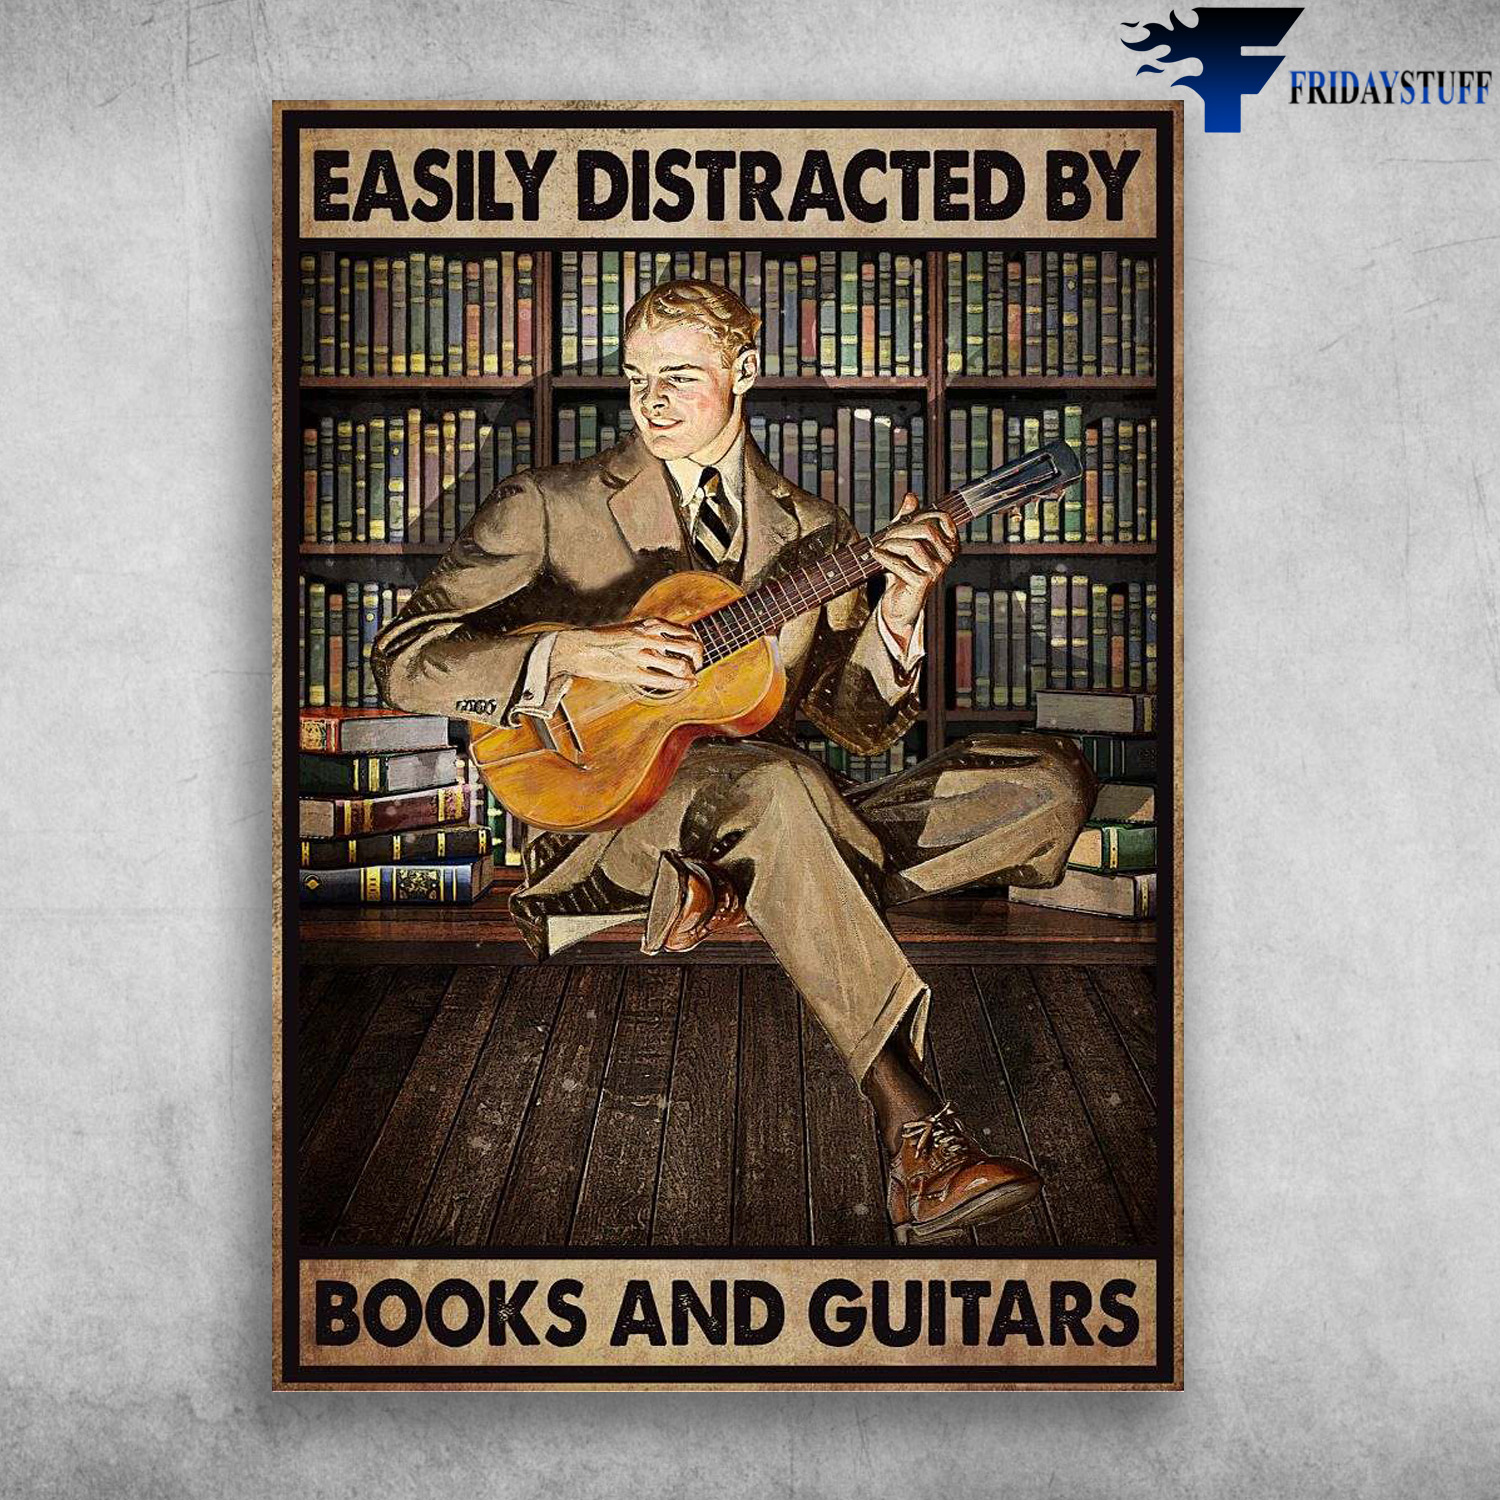 Man Guitar Book - Easily Distracted By, Books And Guitar